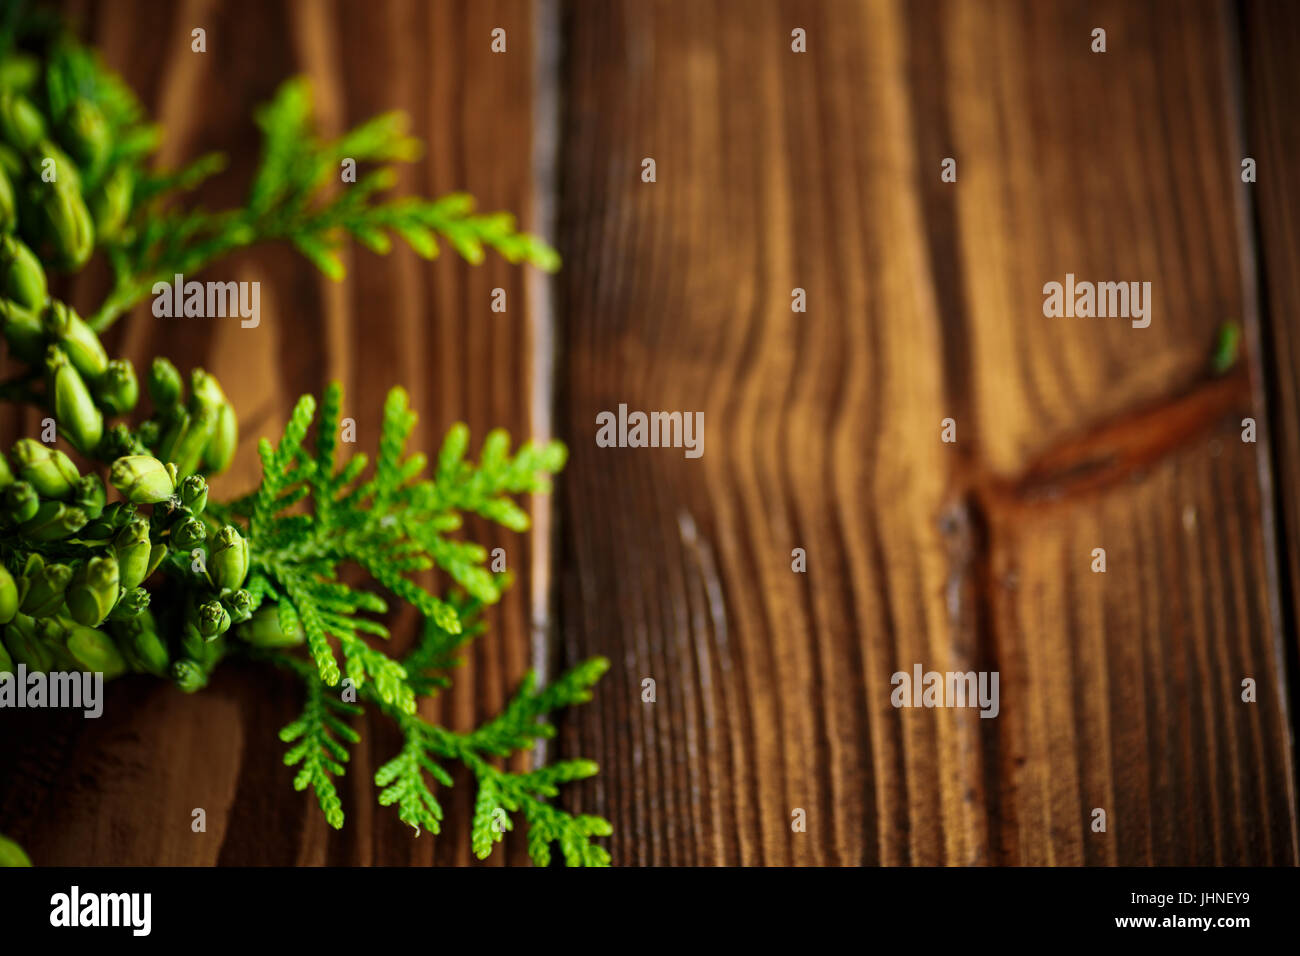 Branch of green thai on a wooden background Stock Photo